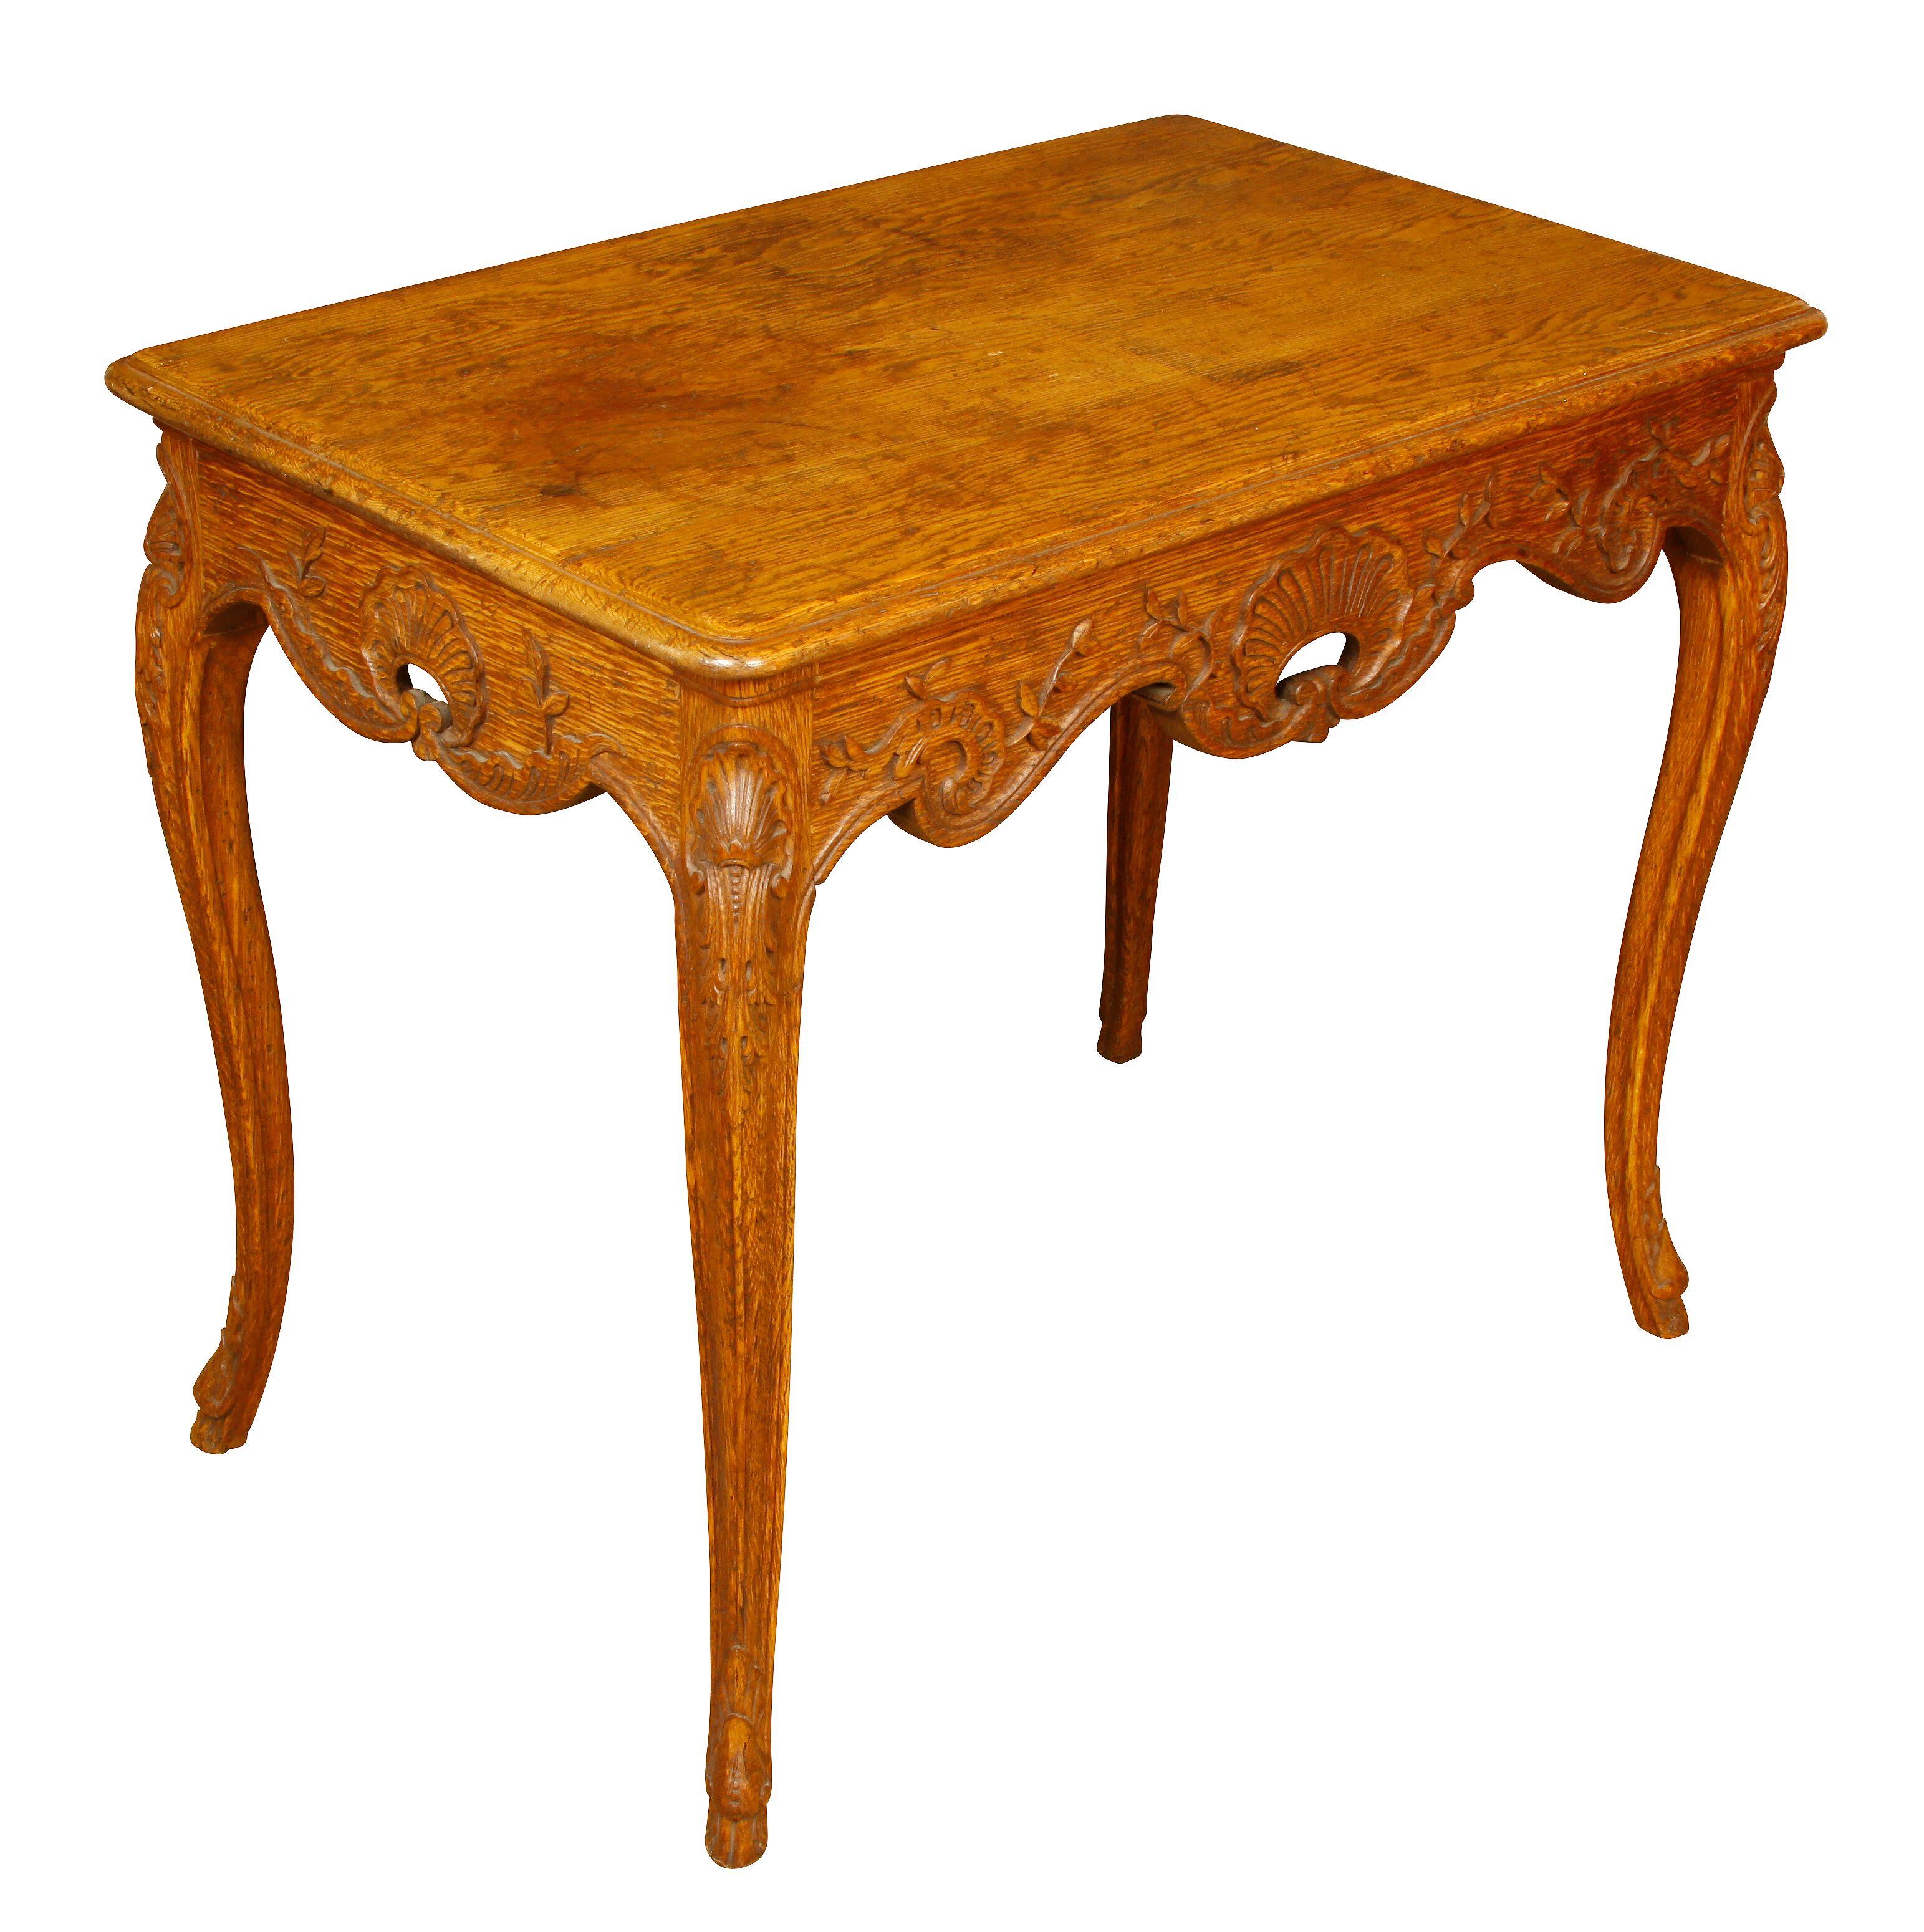 French carved oak table with carved cabriole legs and carved apron front and sides